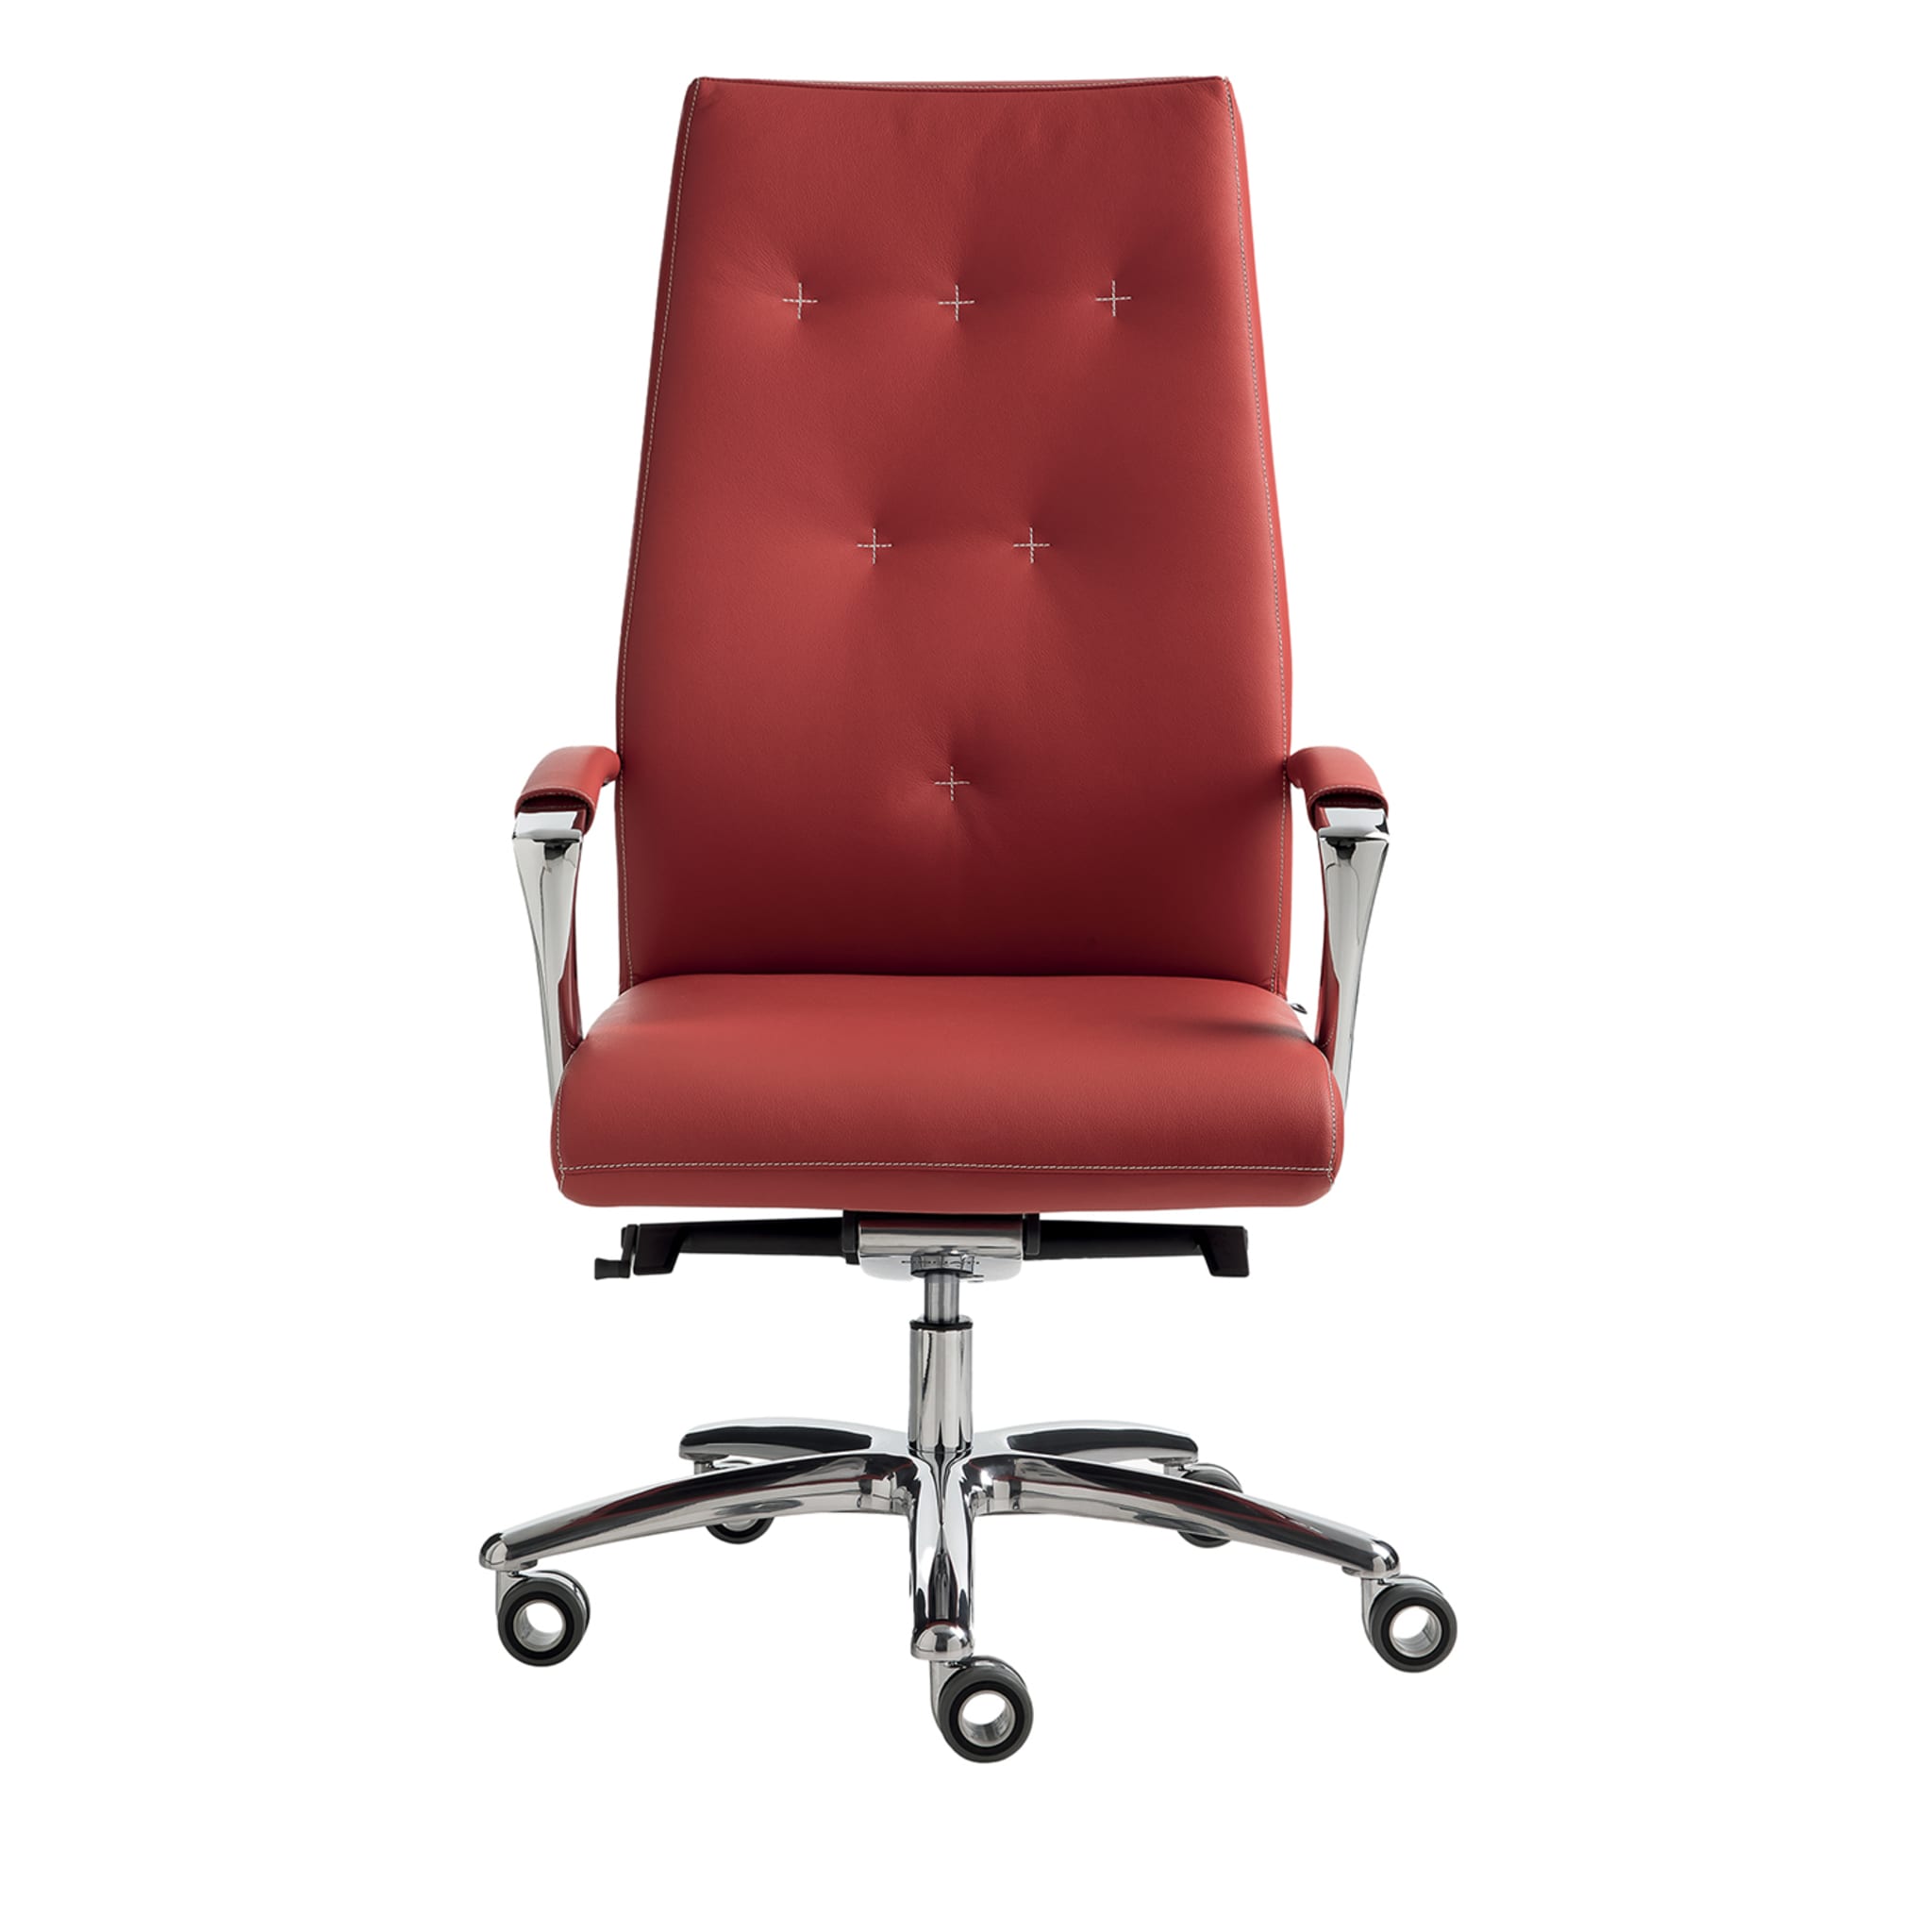 One Red Swivel Armchair - Main view